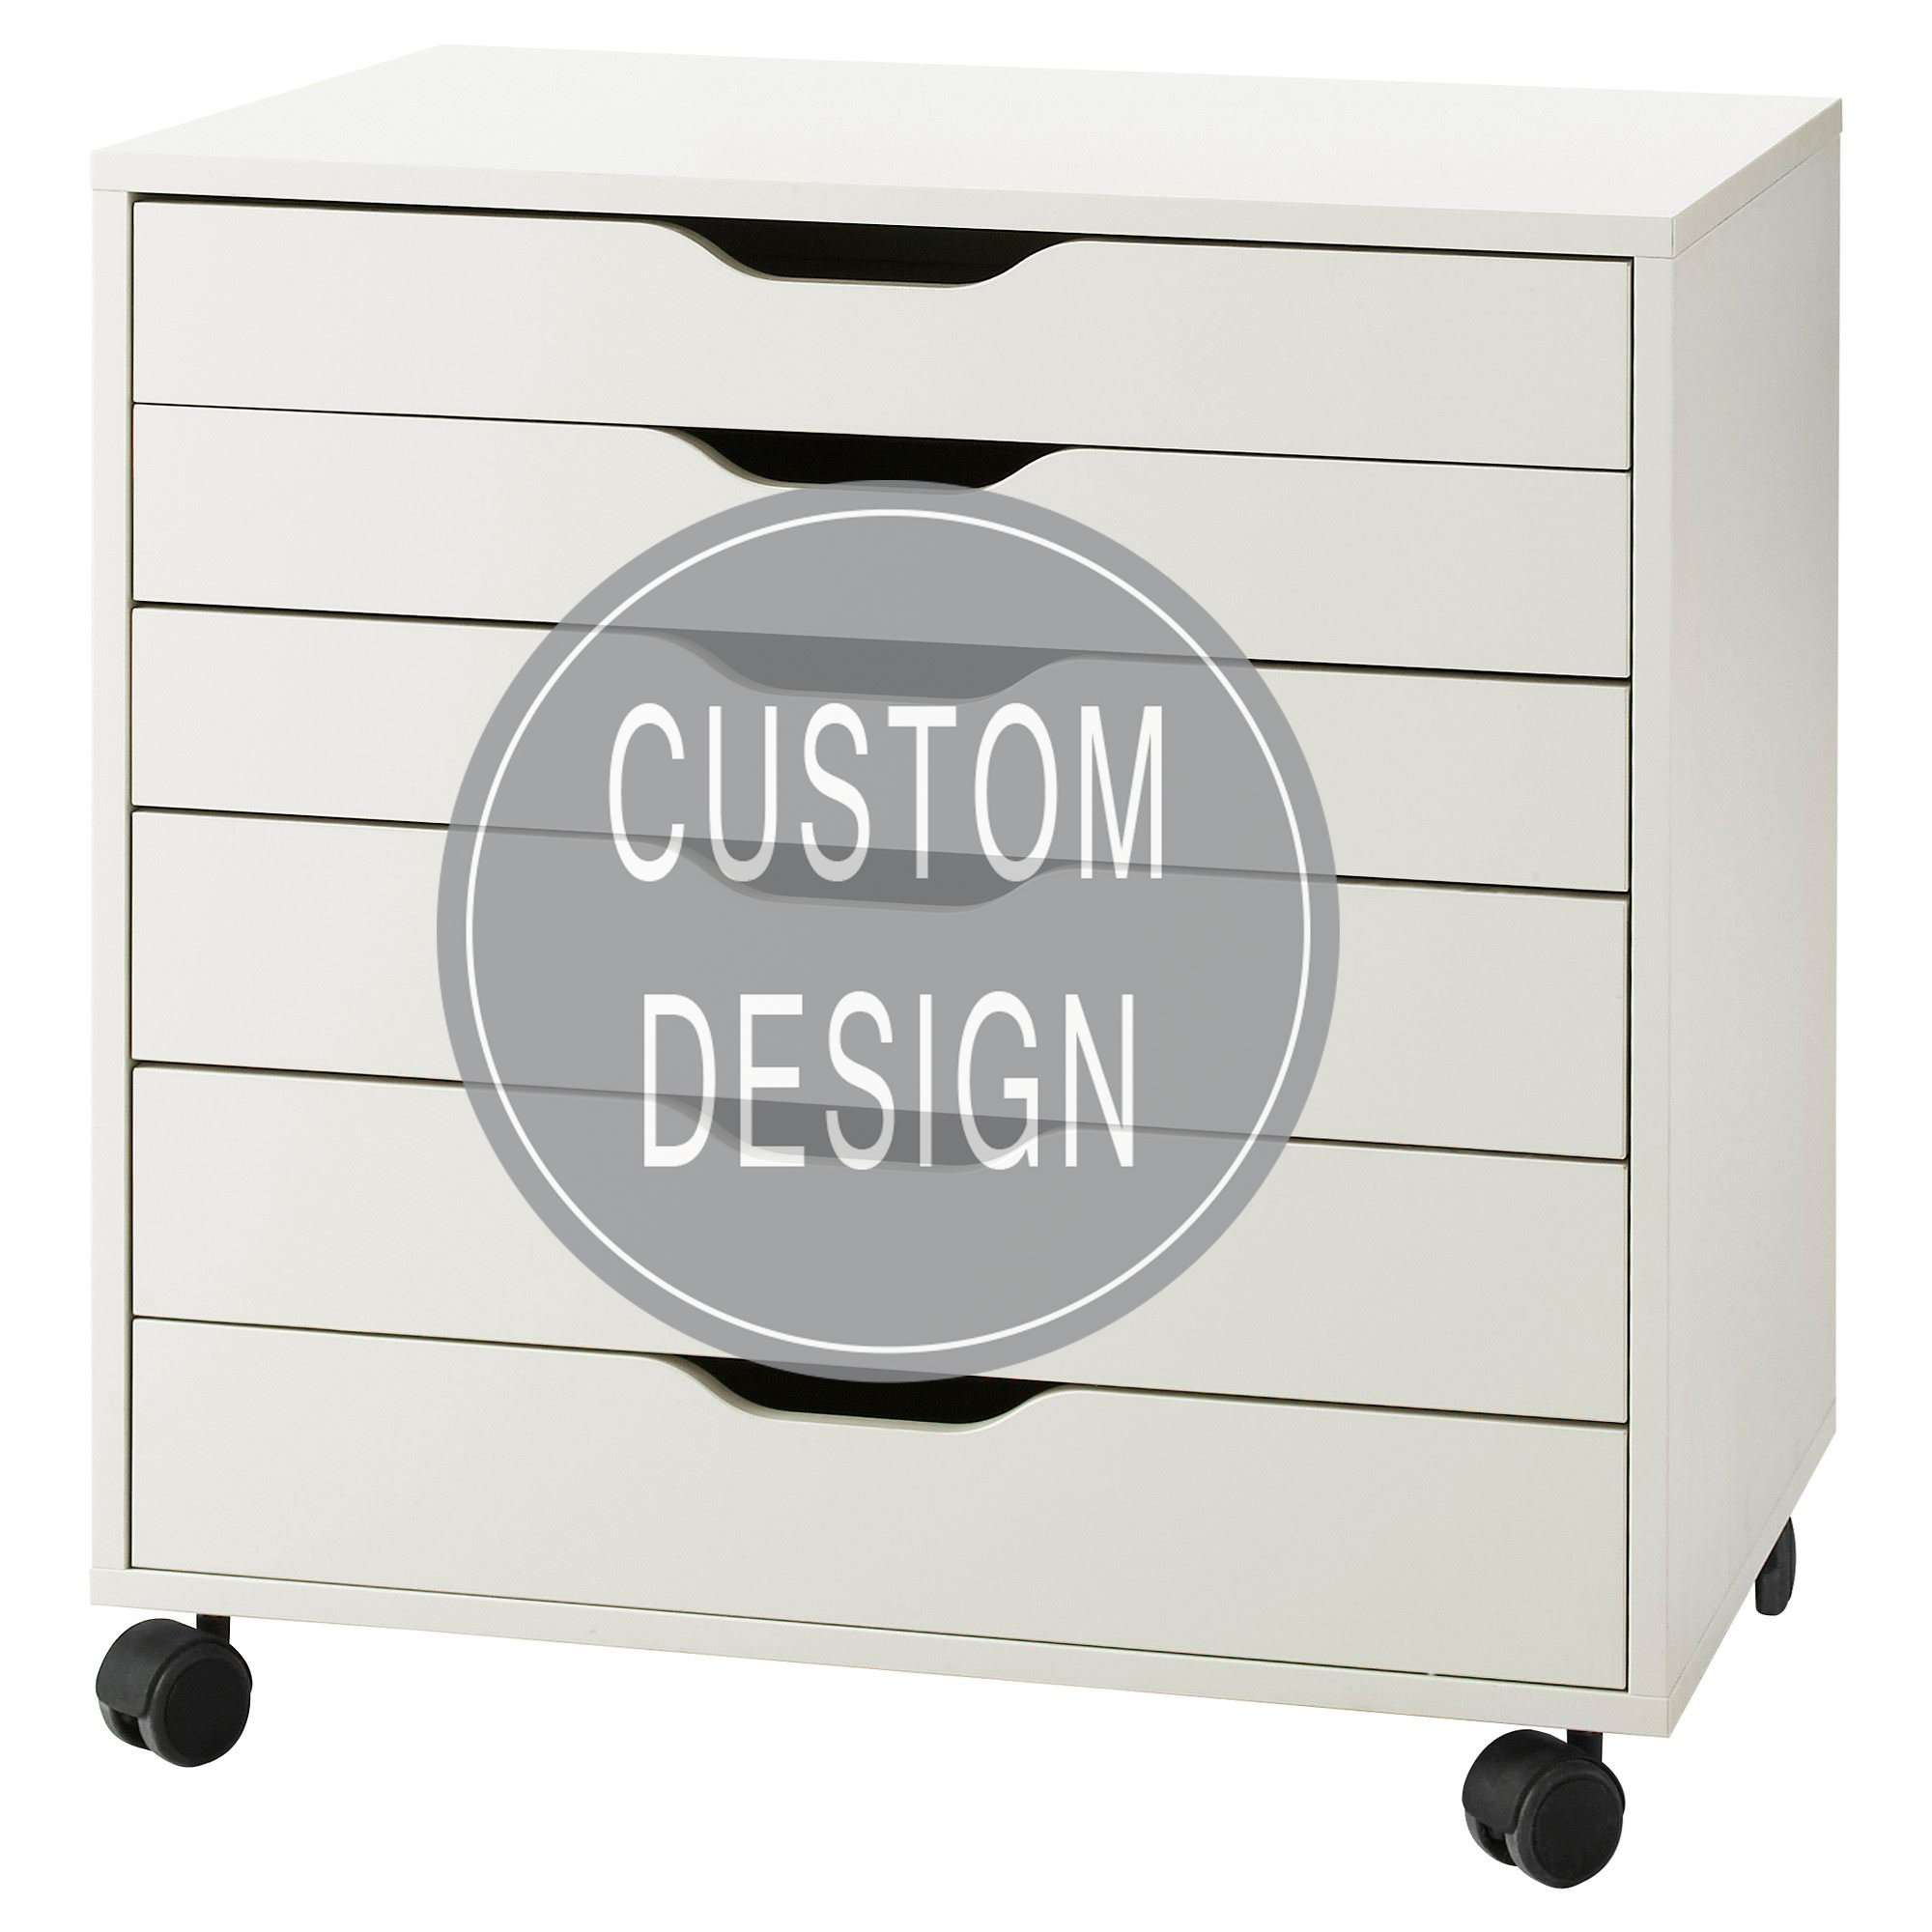 Customized Decal Set For Ikea Alex Drawer Unit